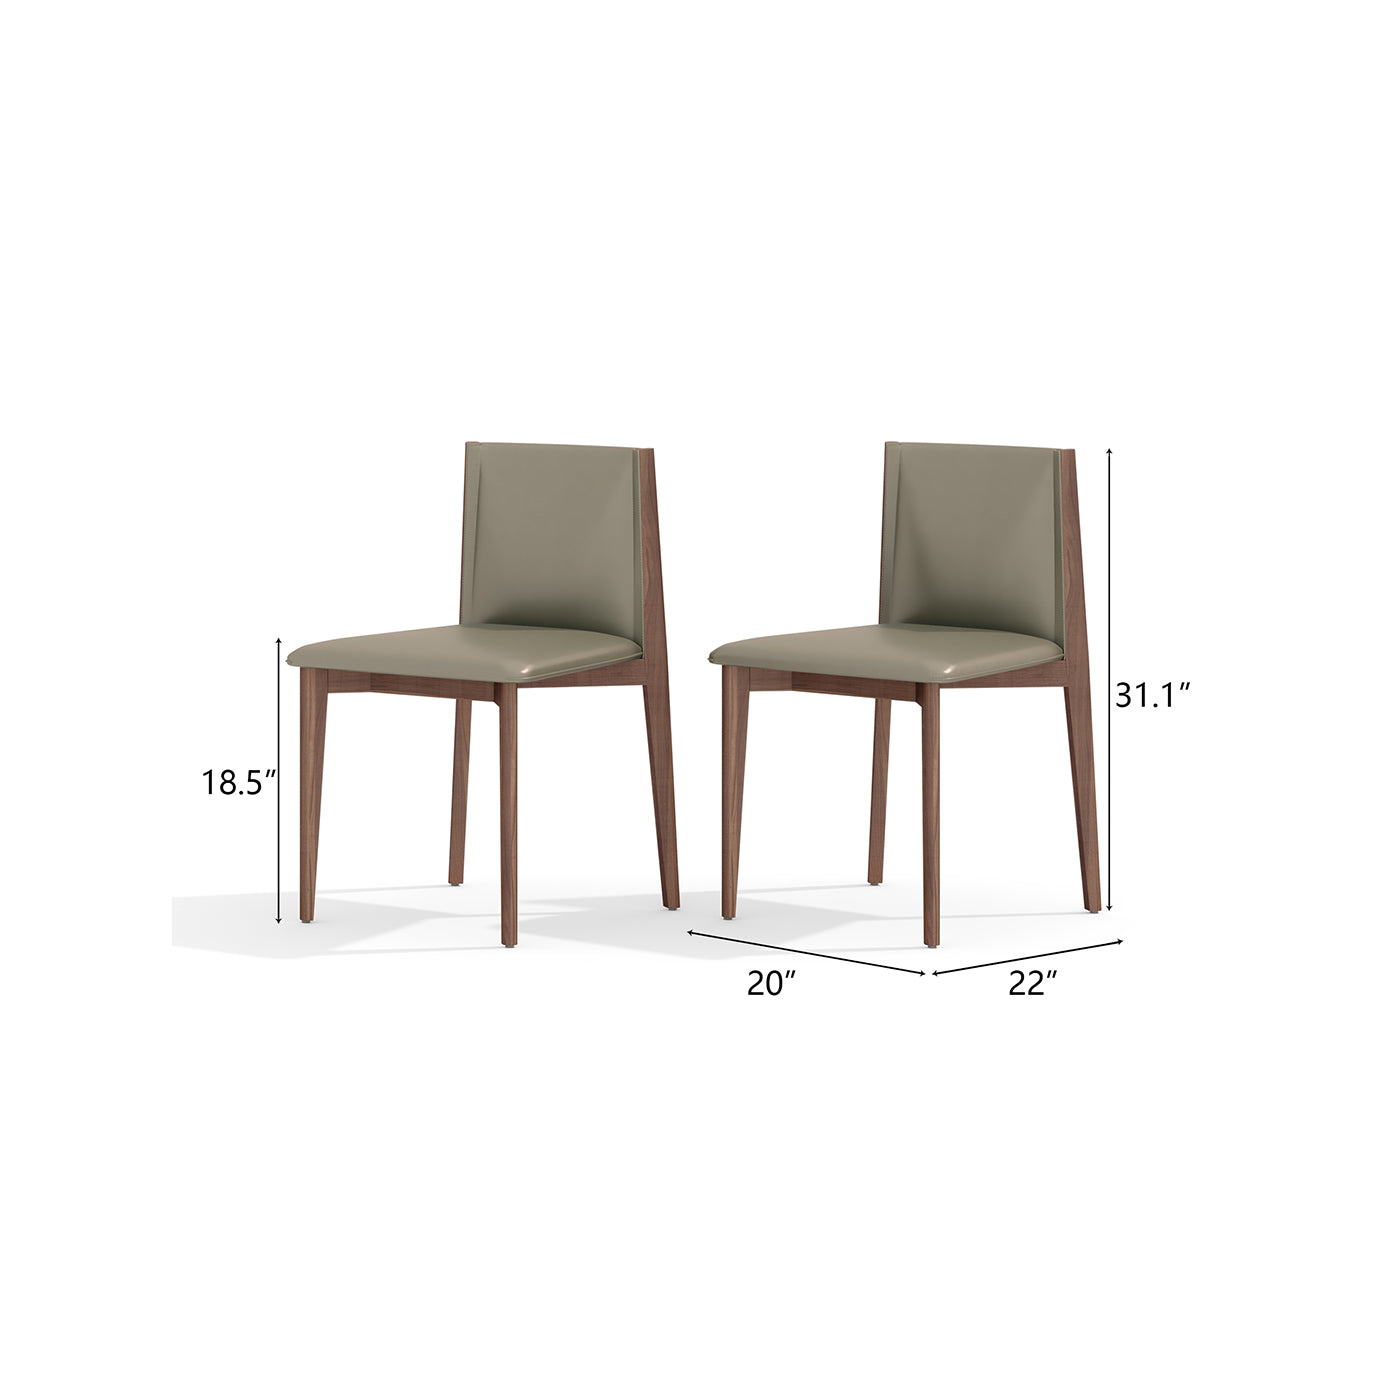 Green Leather Dining Chair(Set Of 2)